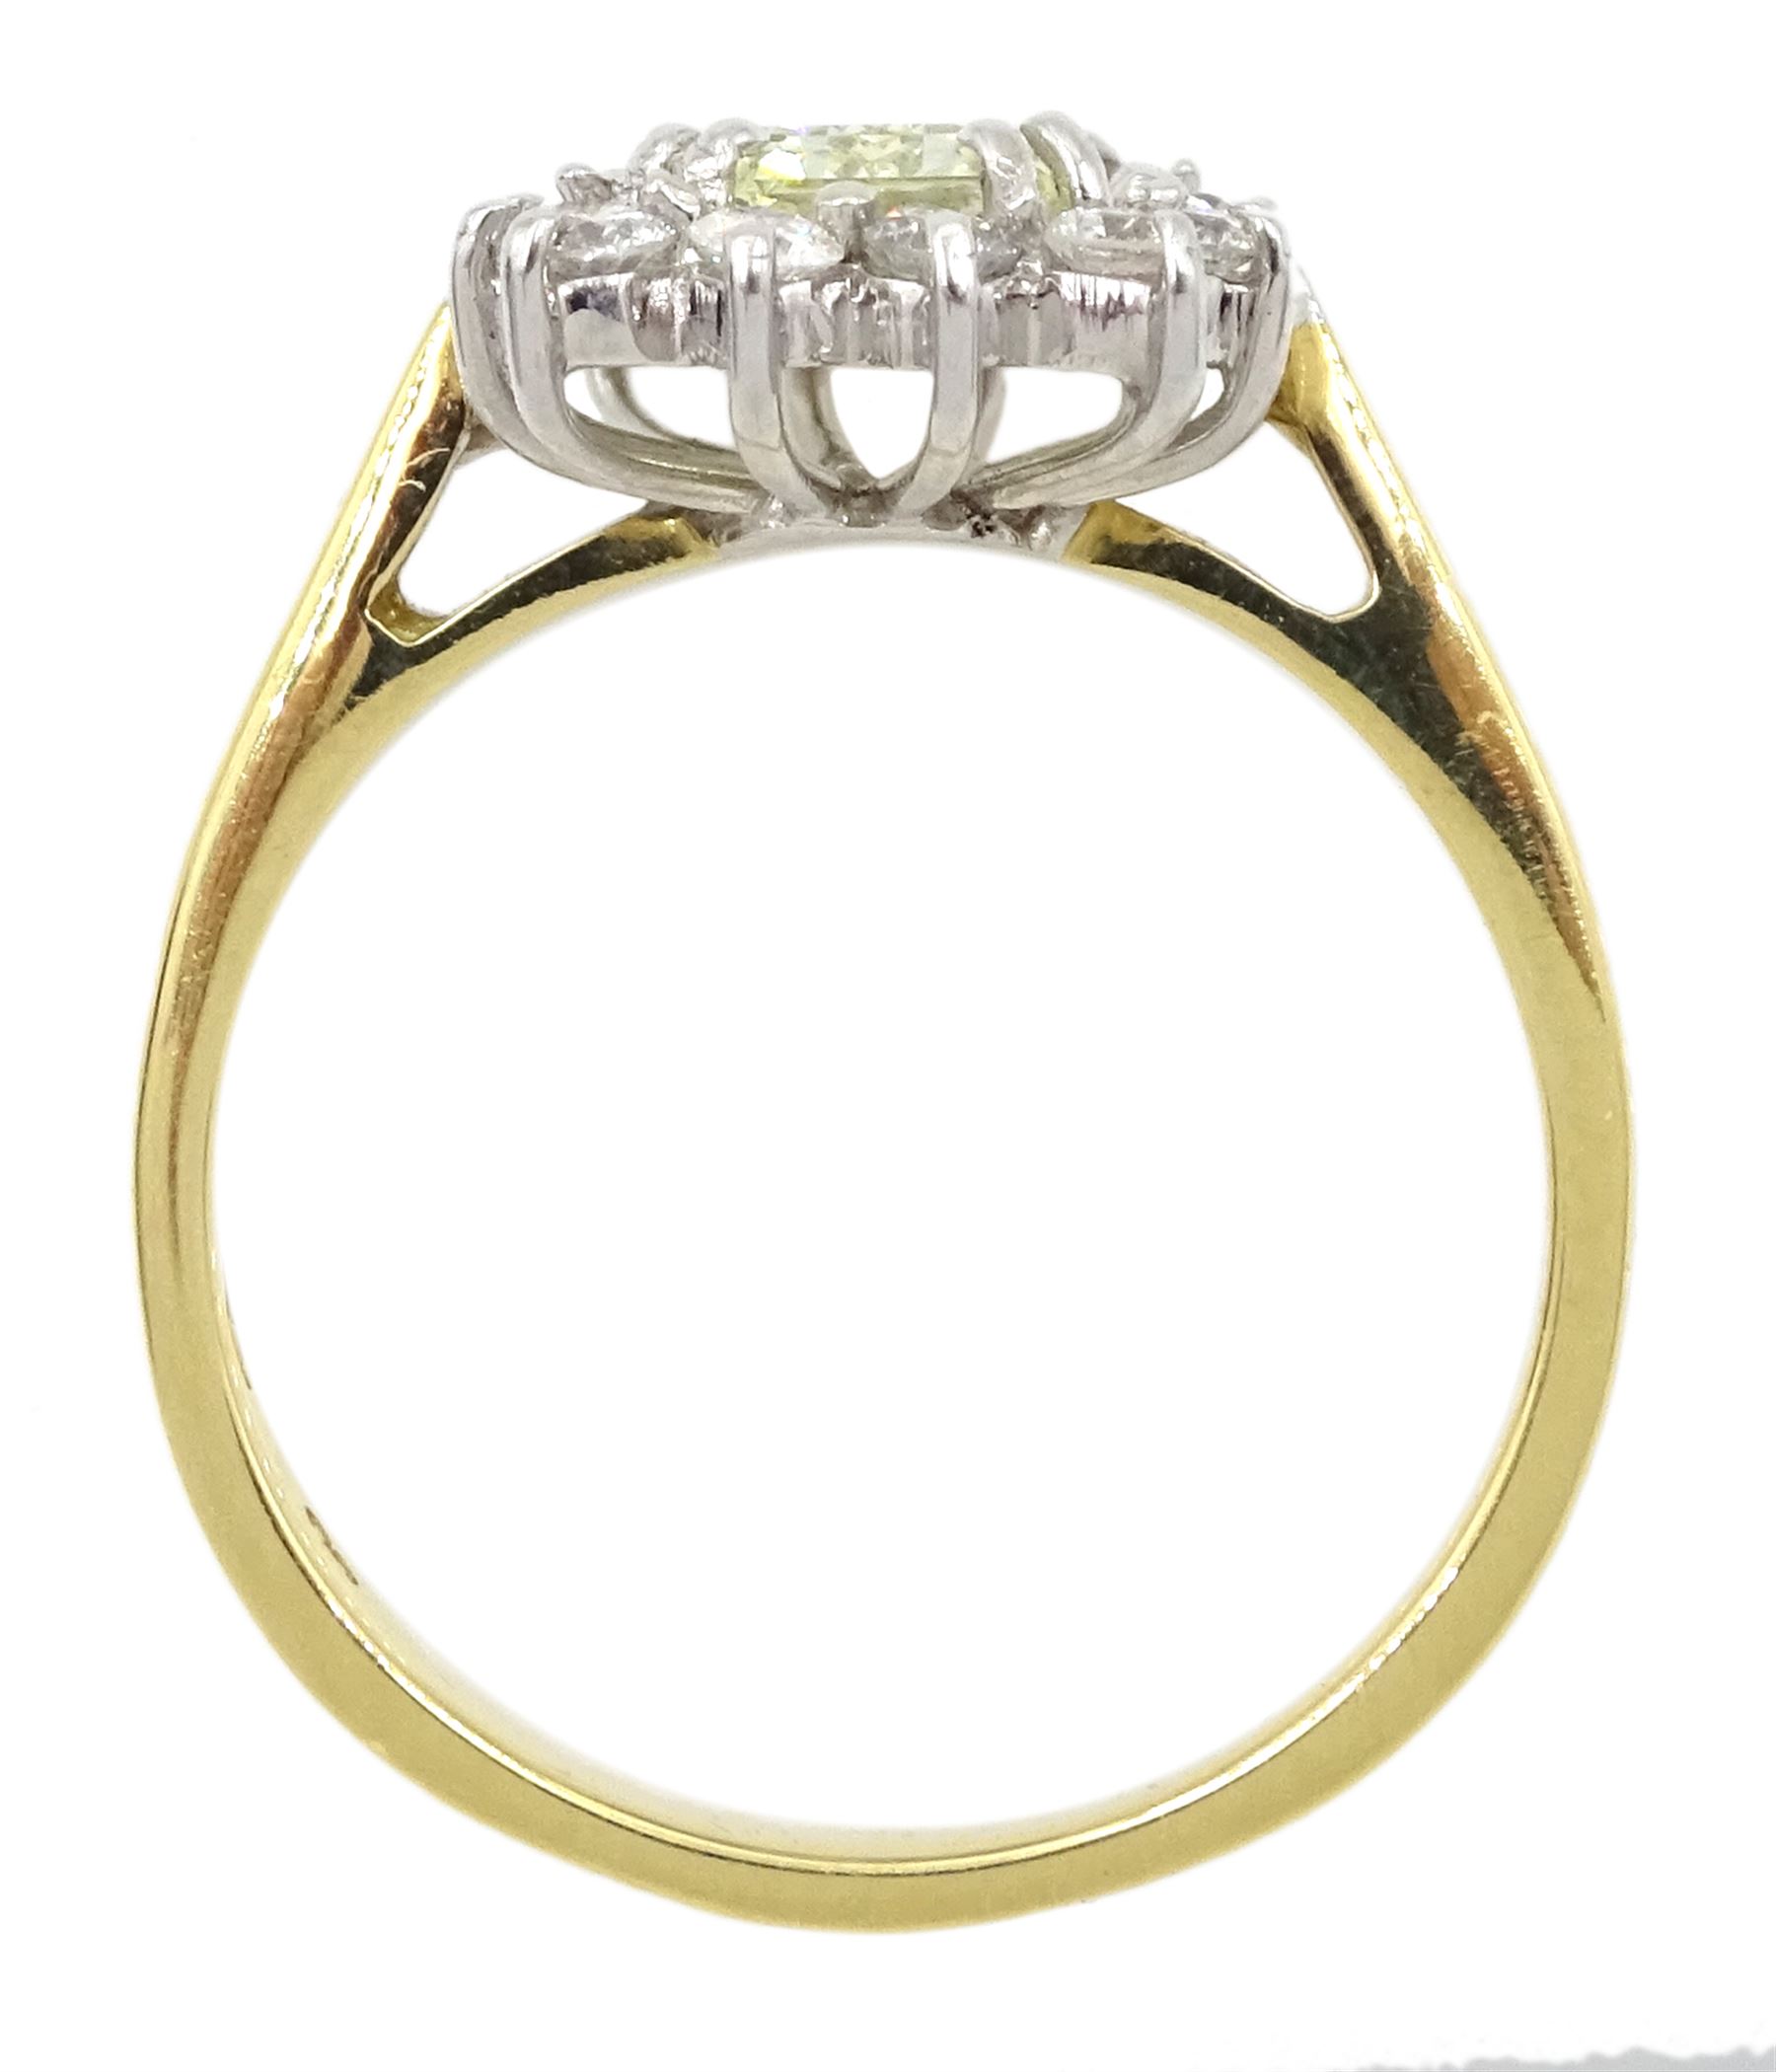 18ct gold emerald cut fancy yellow diamond and round brilliant cut diamond cluster ring - Image 4 of 4